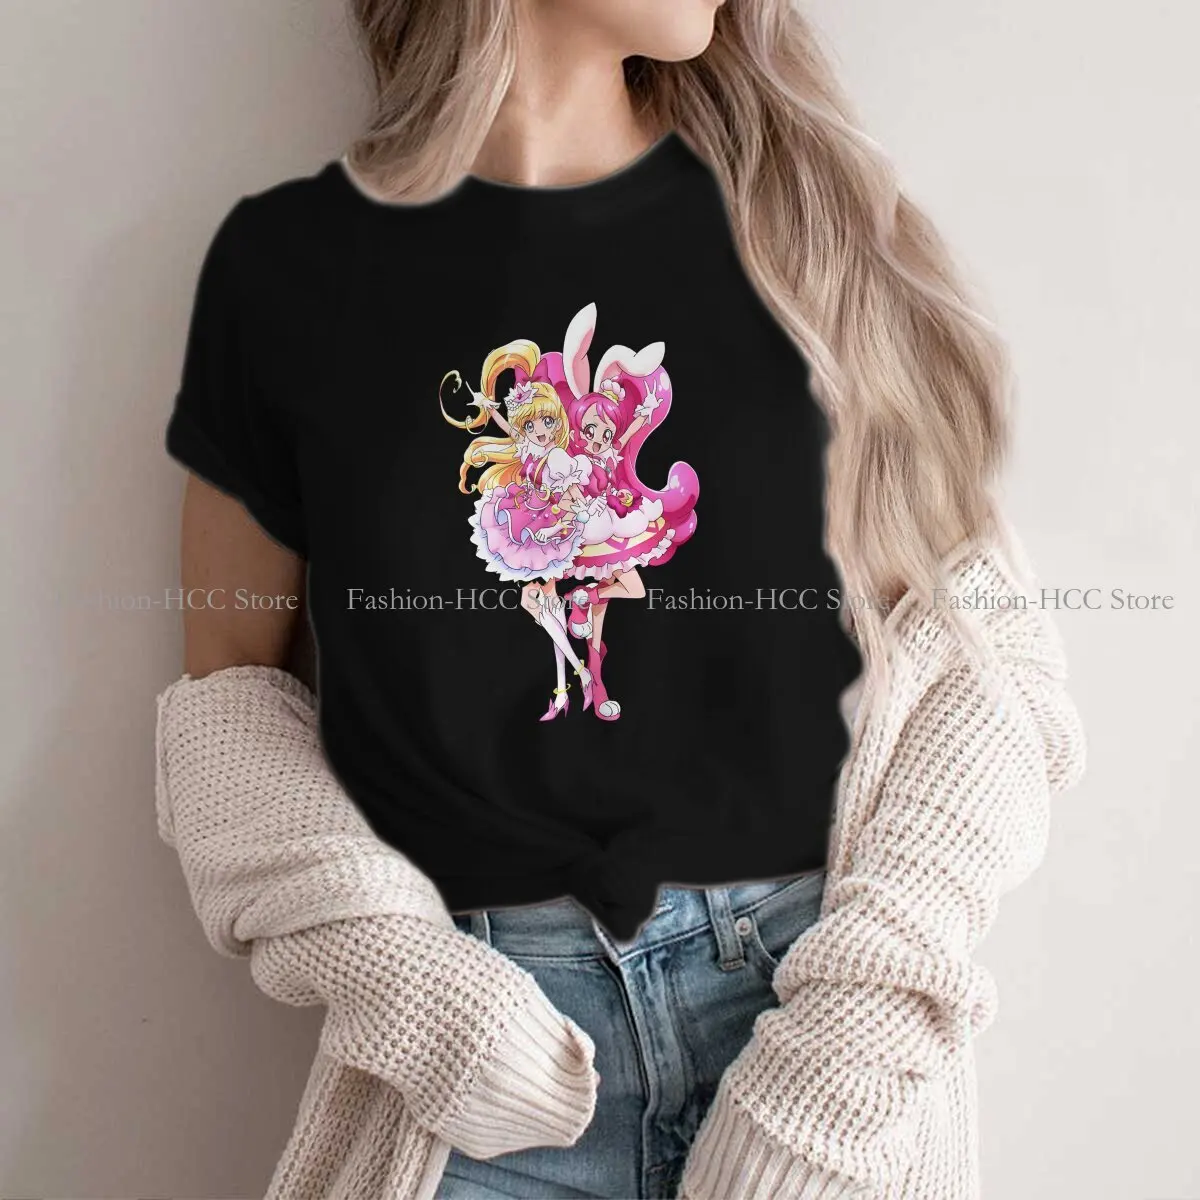 

Delicious Party Hipster Polyester TShirts Pretty Cure Precure Anime Women Harajuku Tops T Shirt Round Neck